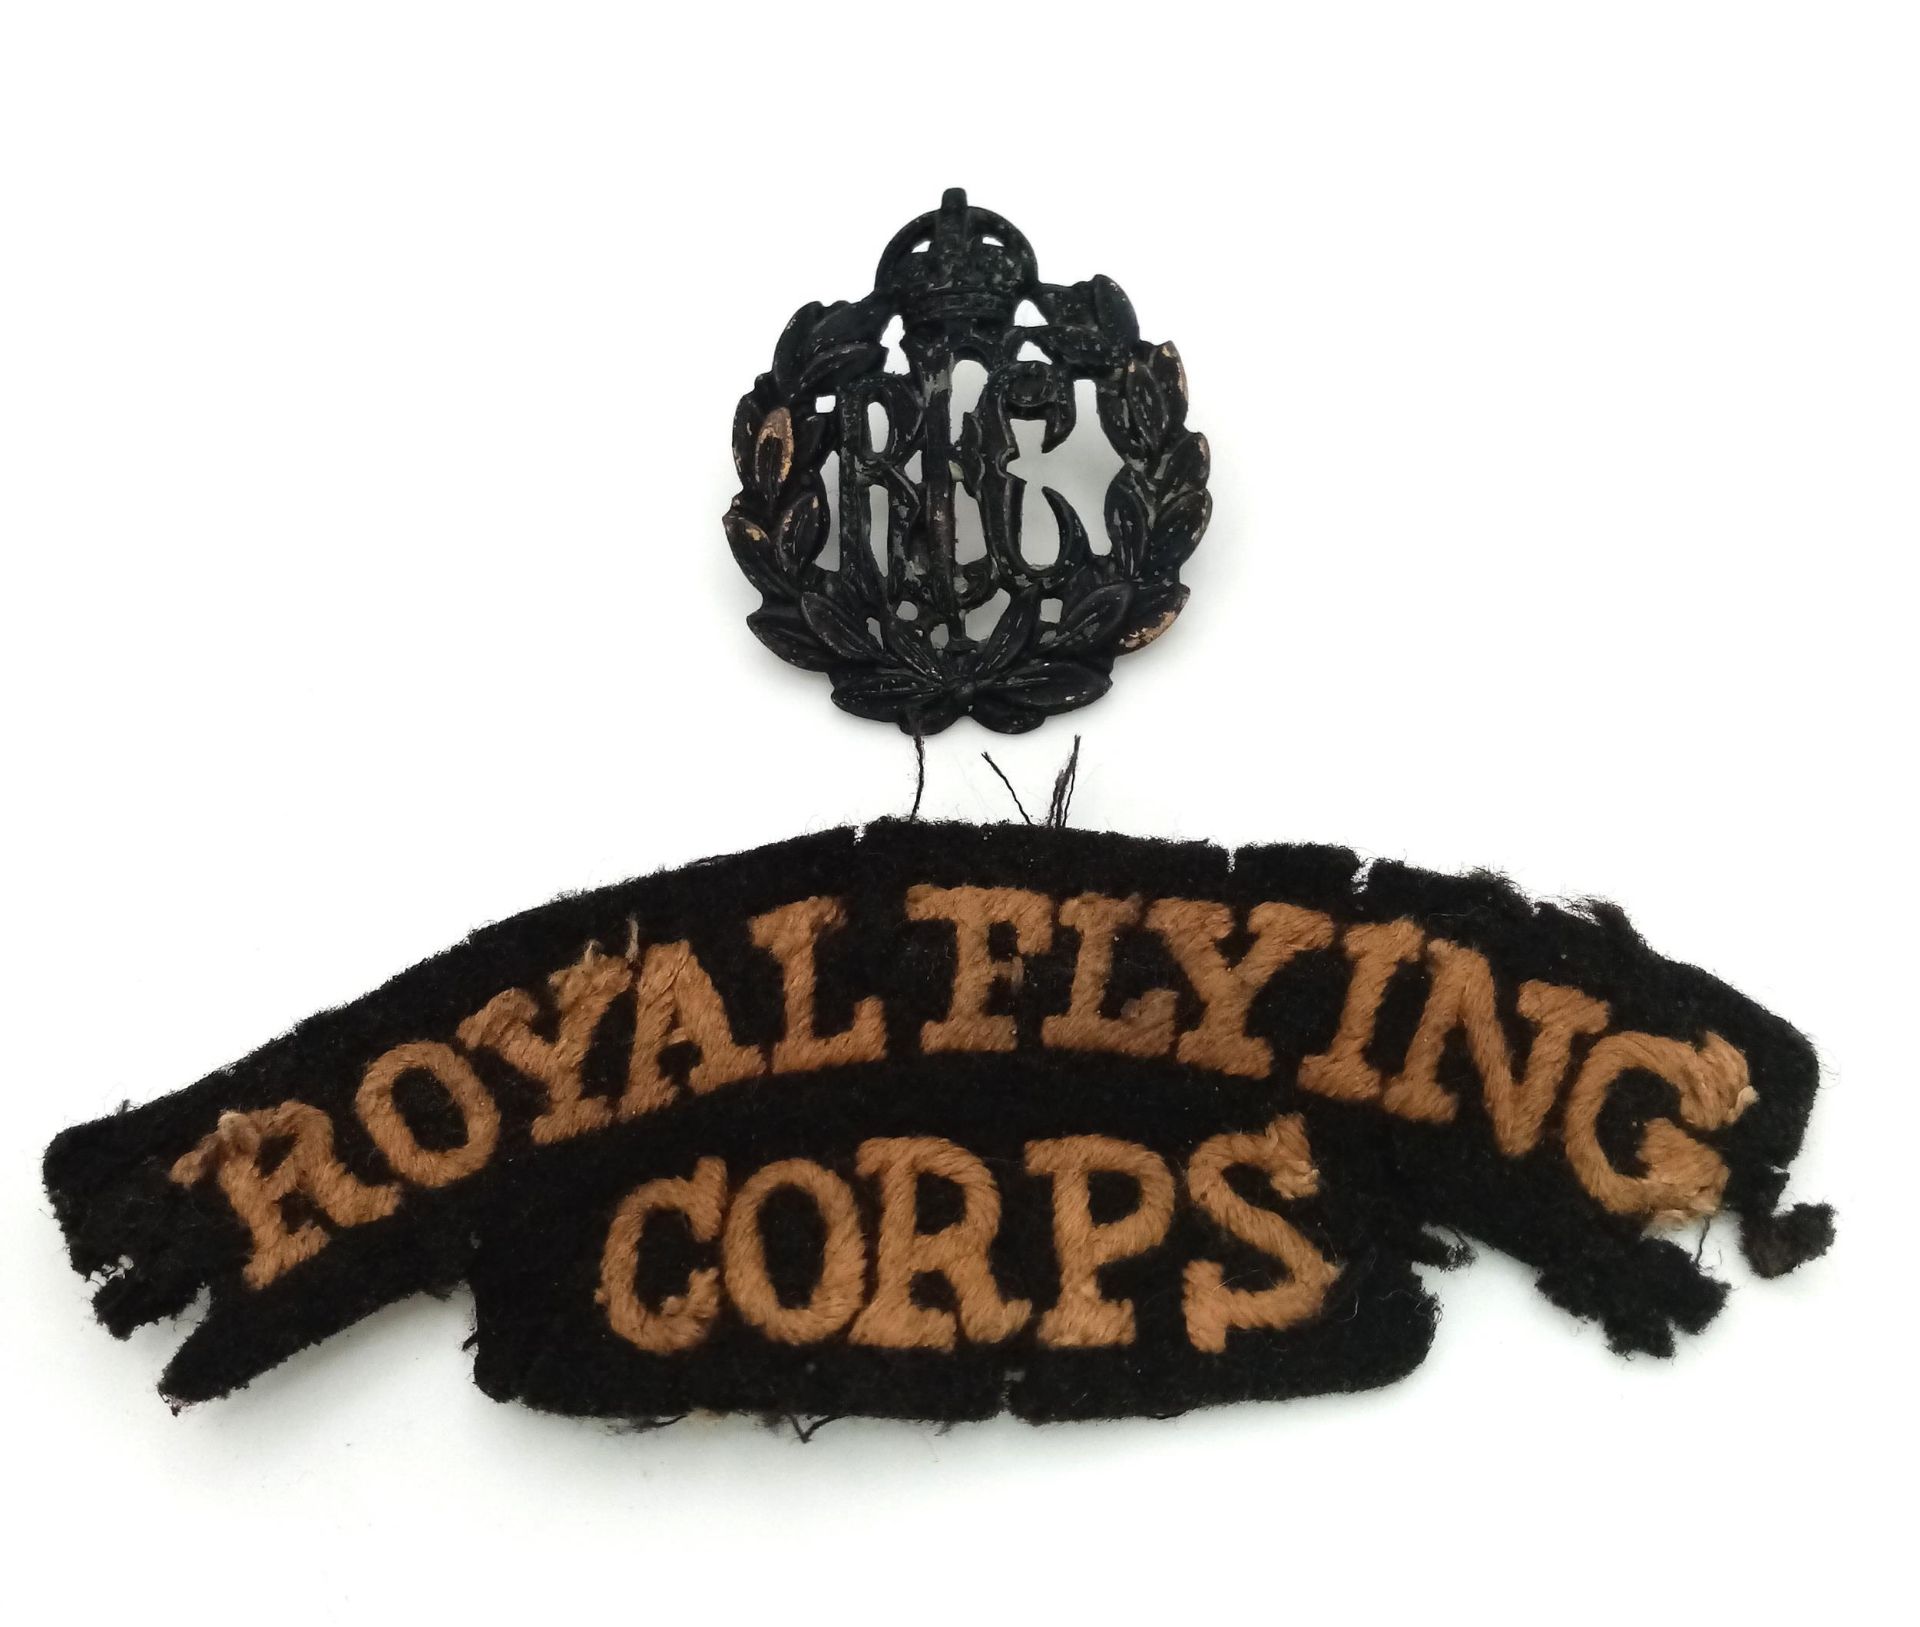 Other Ranks WW1 Royal Flying Corps Cap Badge and Shoulder Patch.